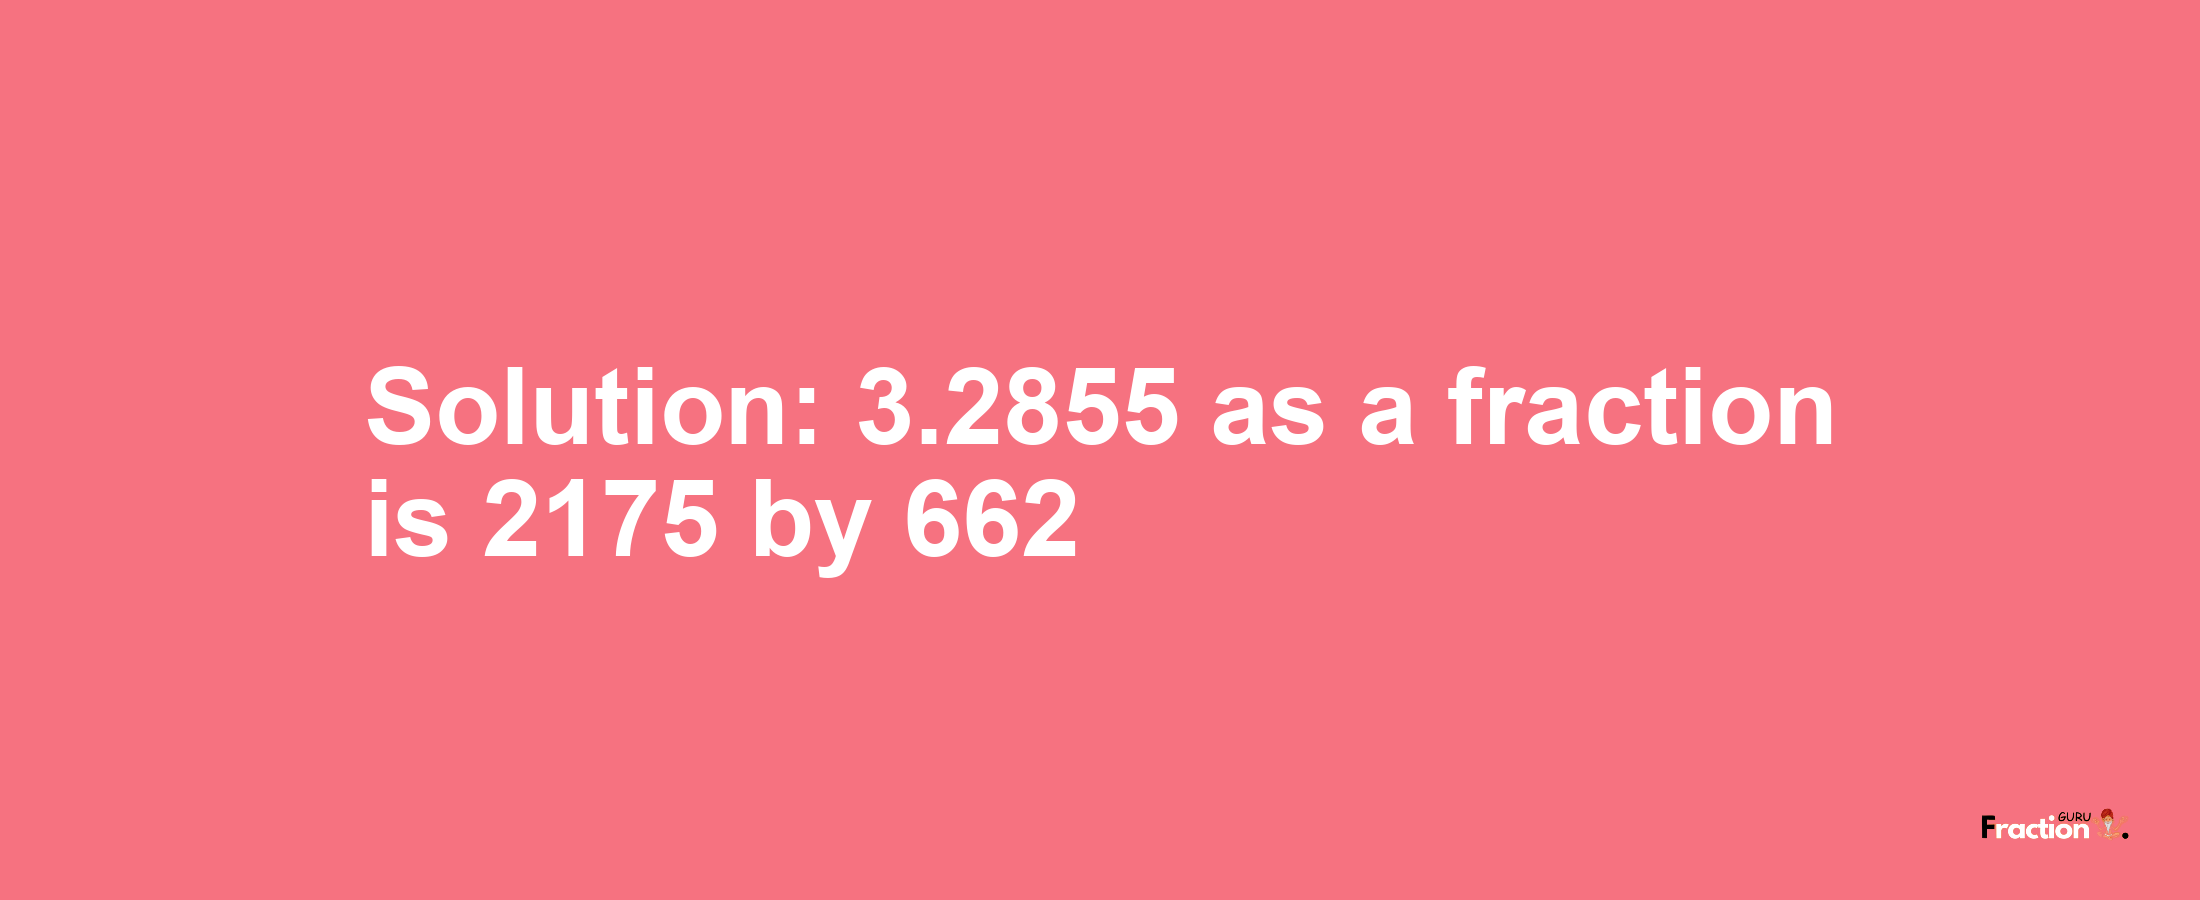 Solution:3.2855 as a fraction is 2175/662